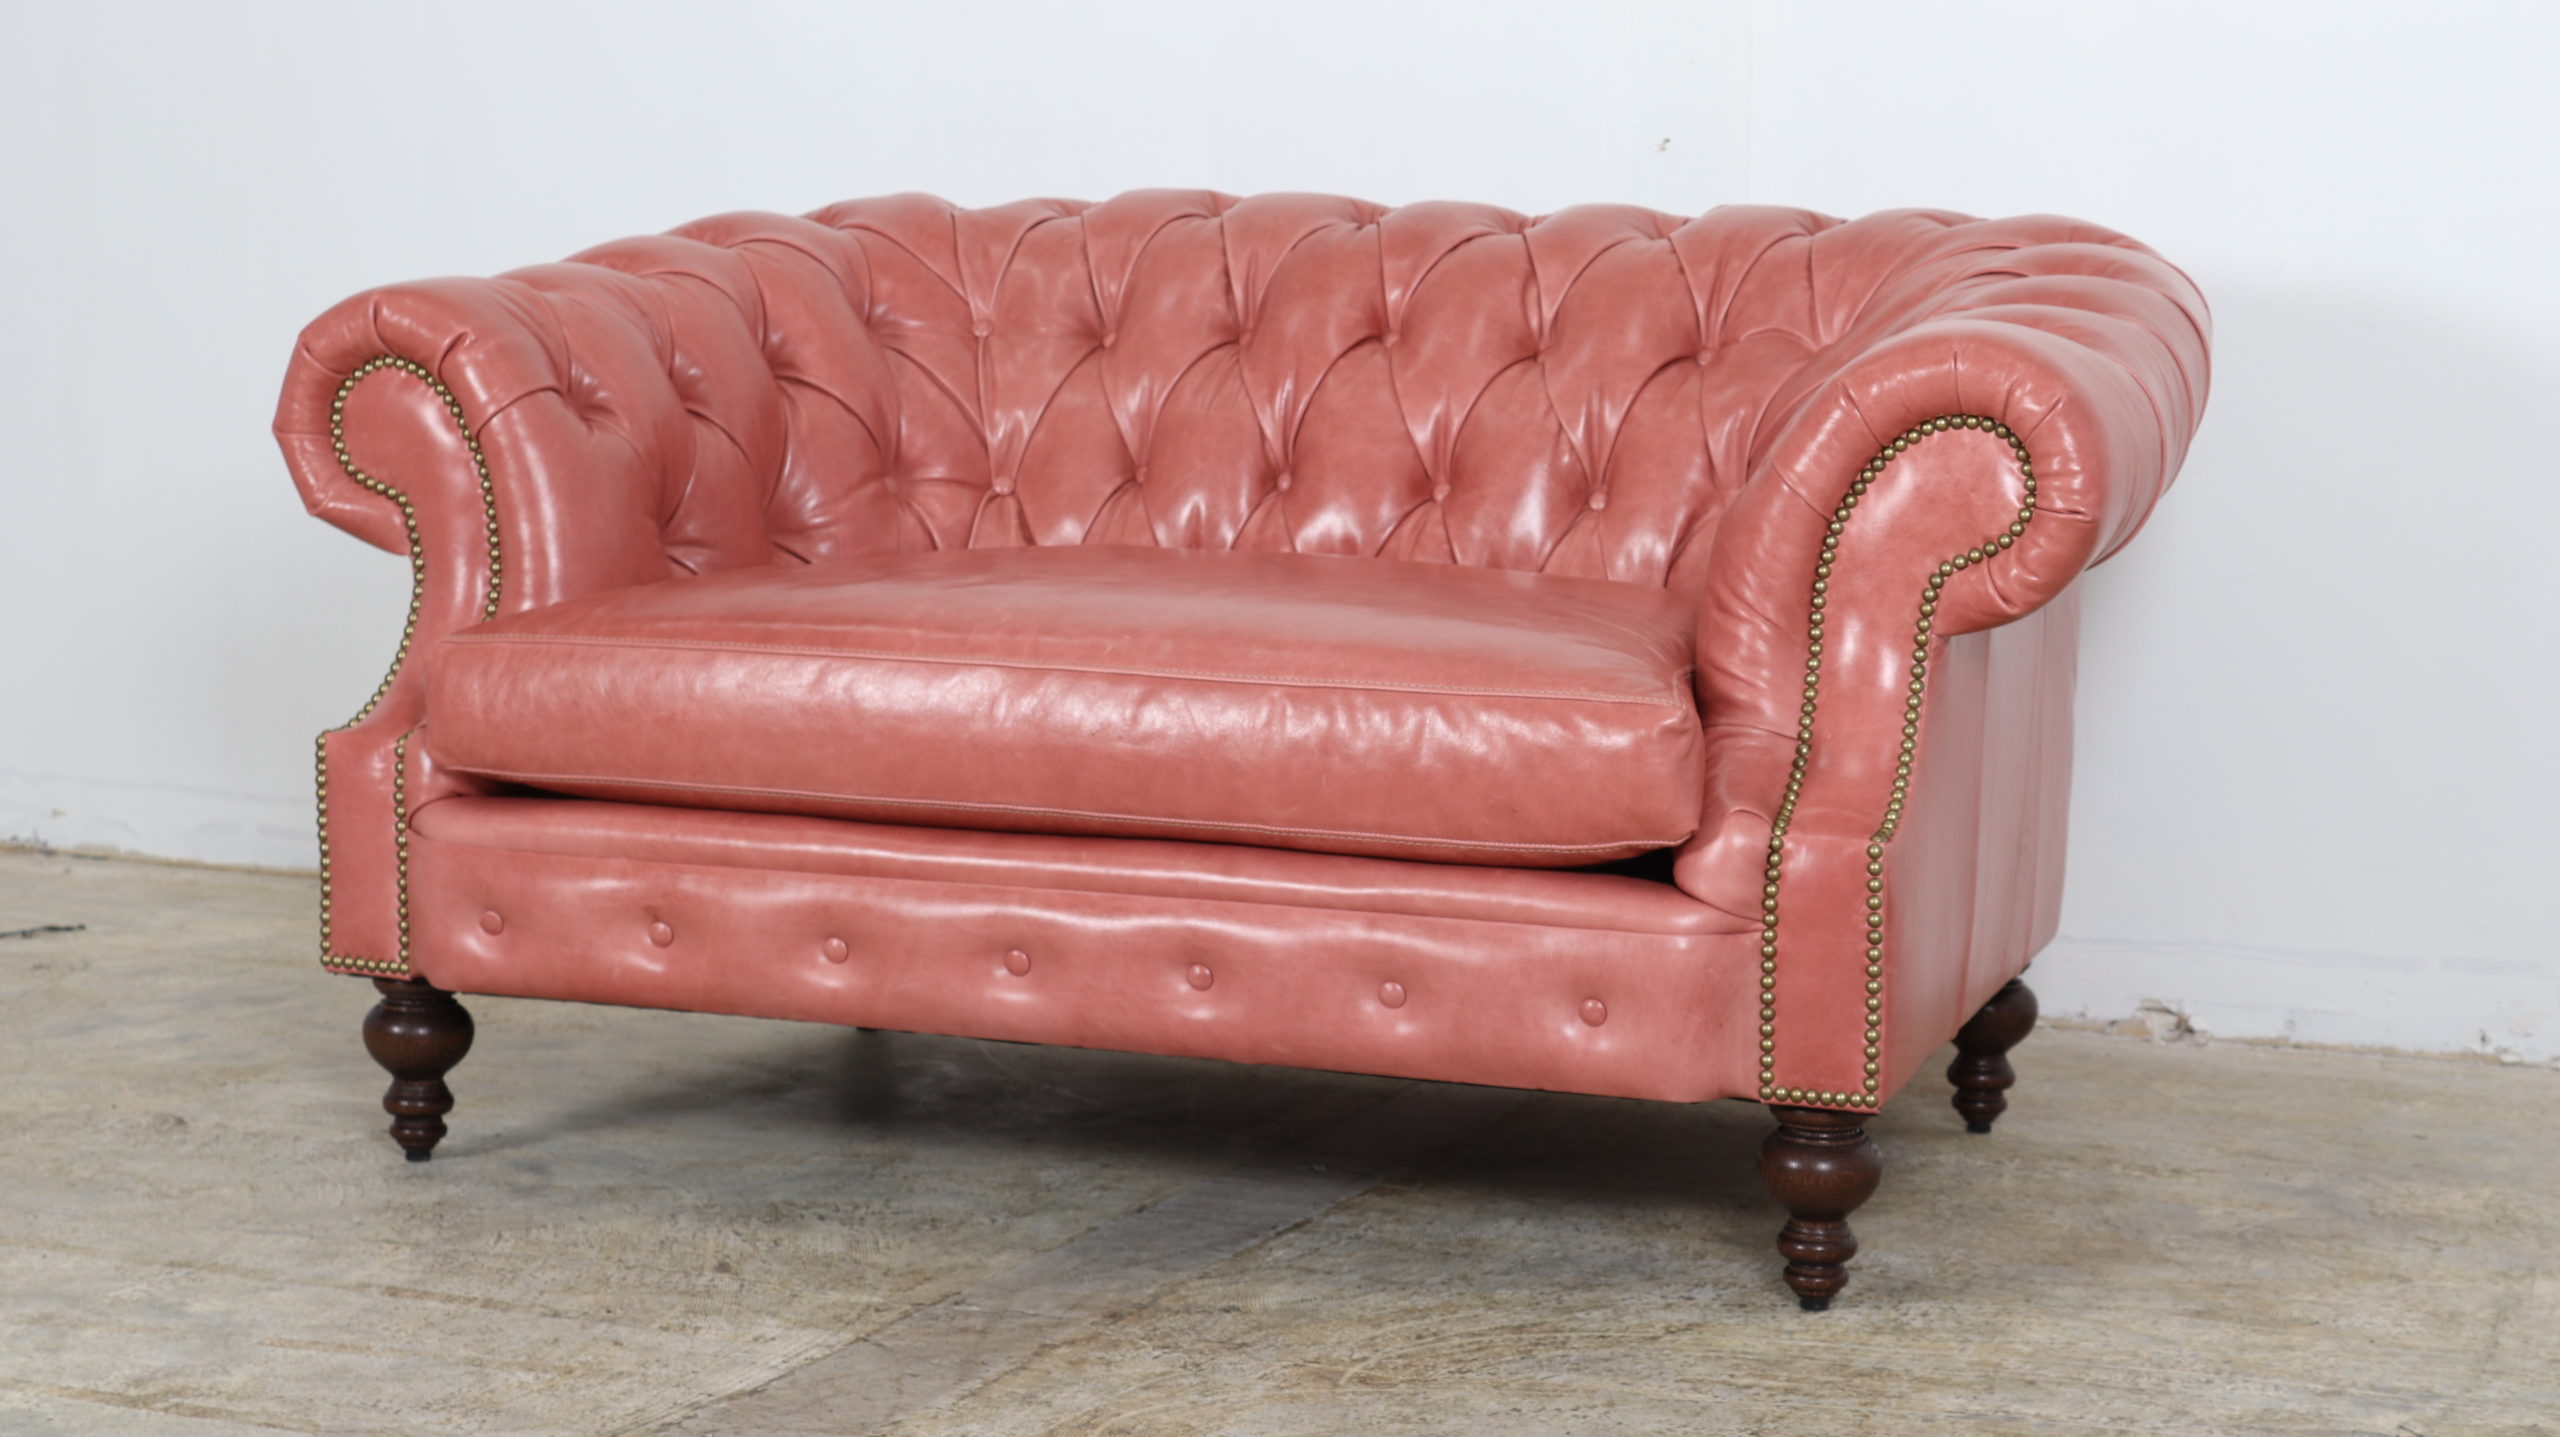 JB Martin's Mont Blanc "Tangier" leather on a Biltmore Chesterfield loveseat